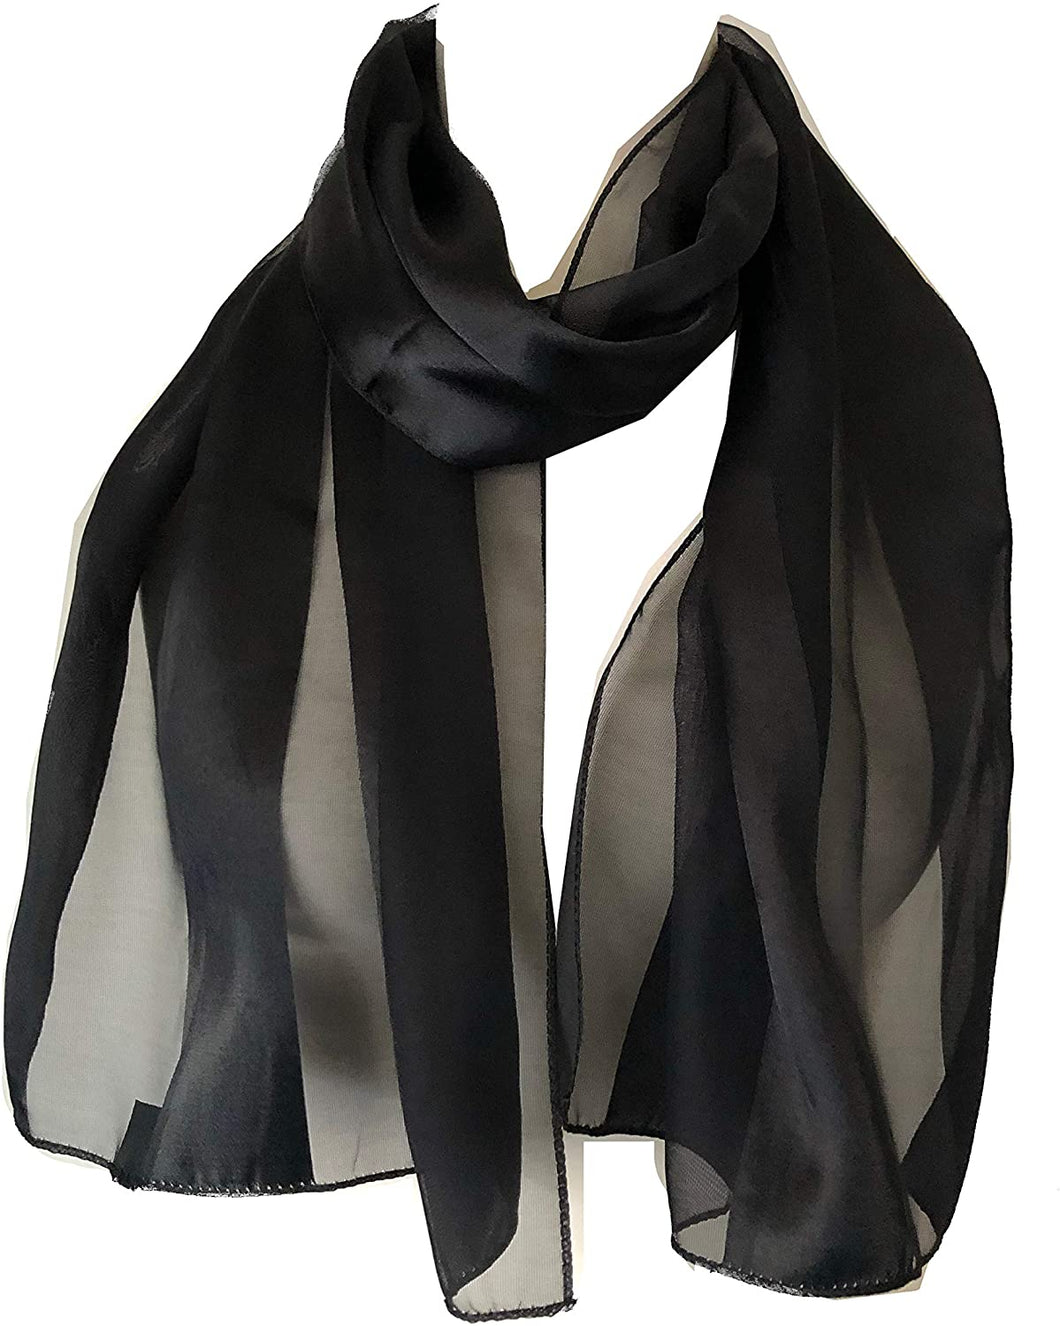 Plain Black Faux Chiffon and Satin Style Striped Scarf Thin Pretty Scarf Great for Any Outfit Lovely Gift